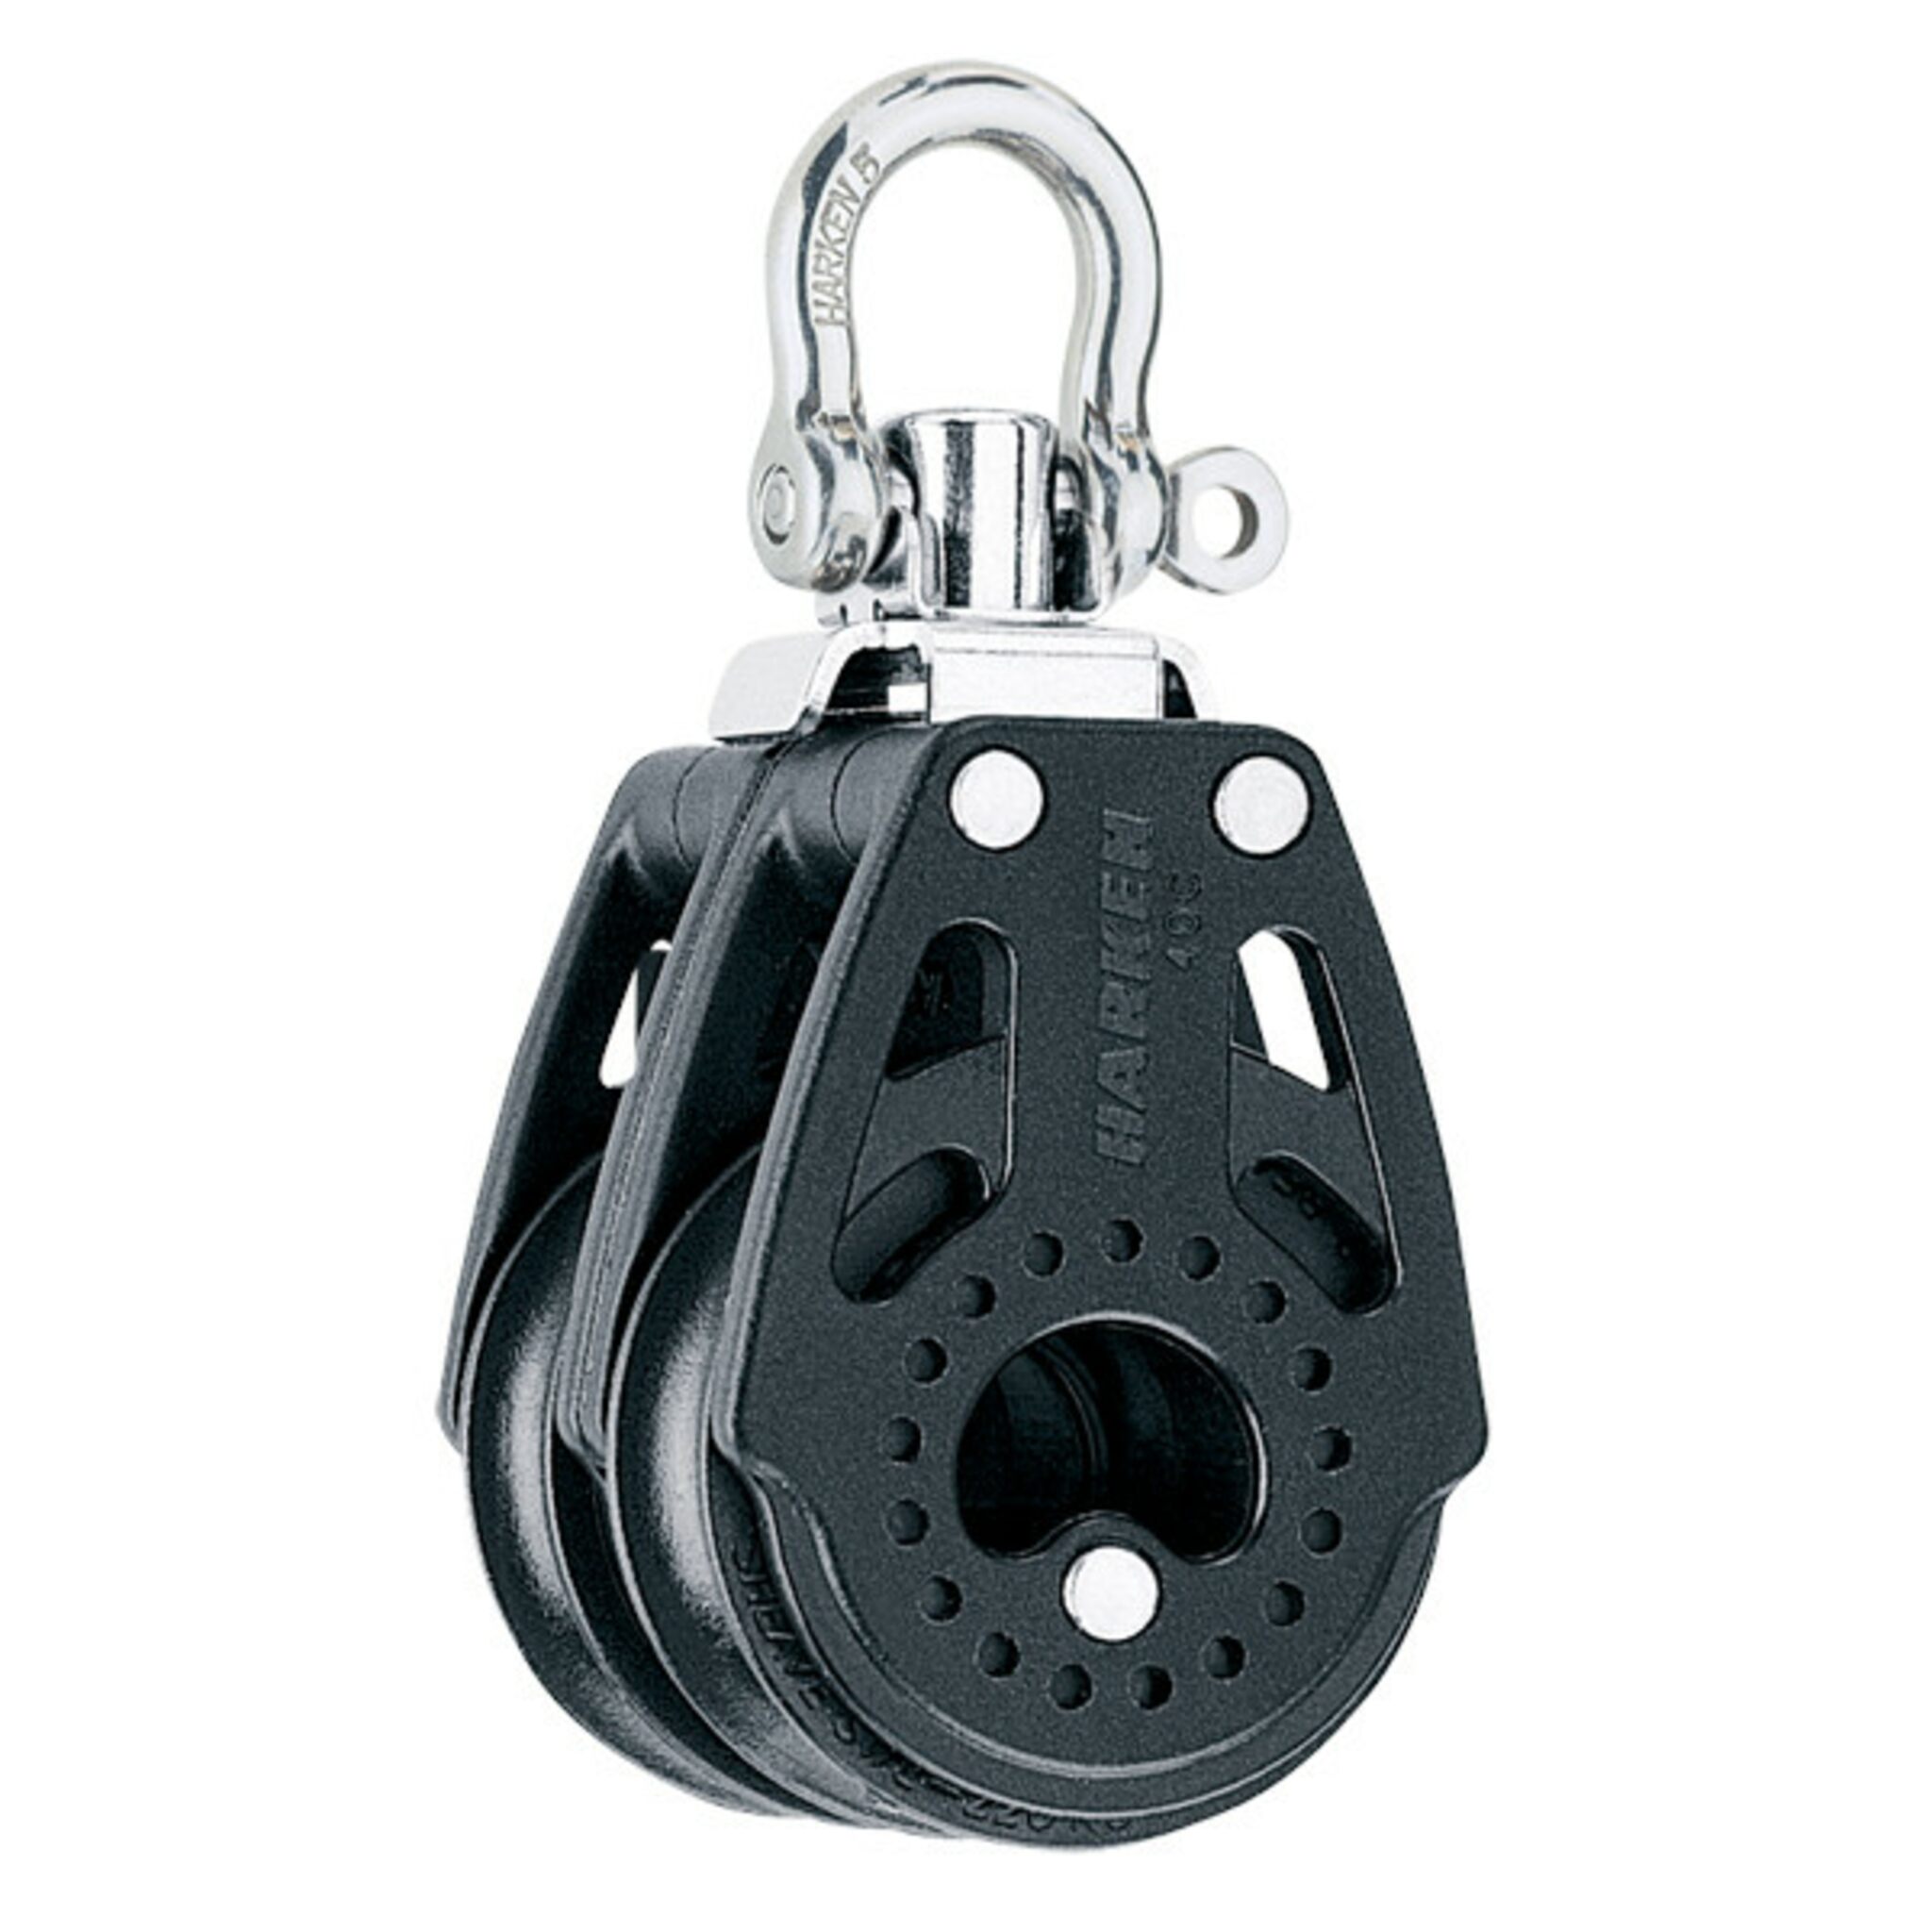 H2638 40 mm Carbo double block with swivel